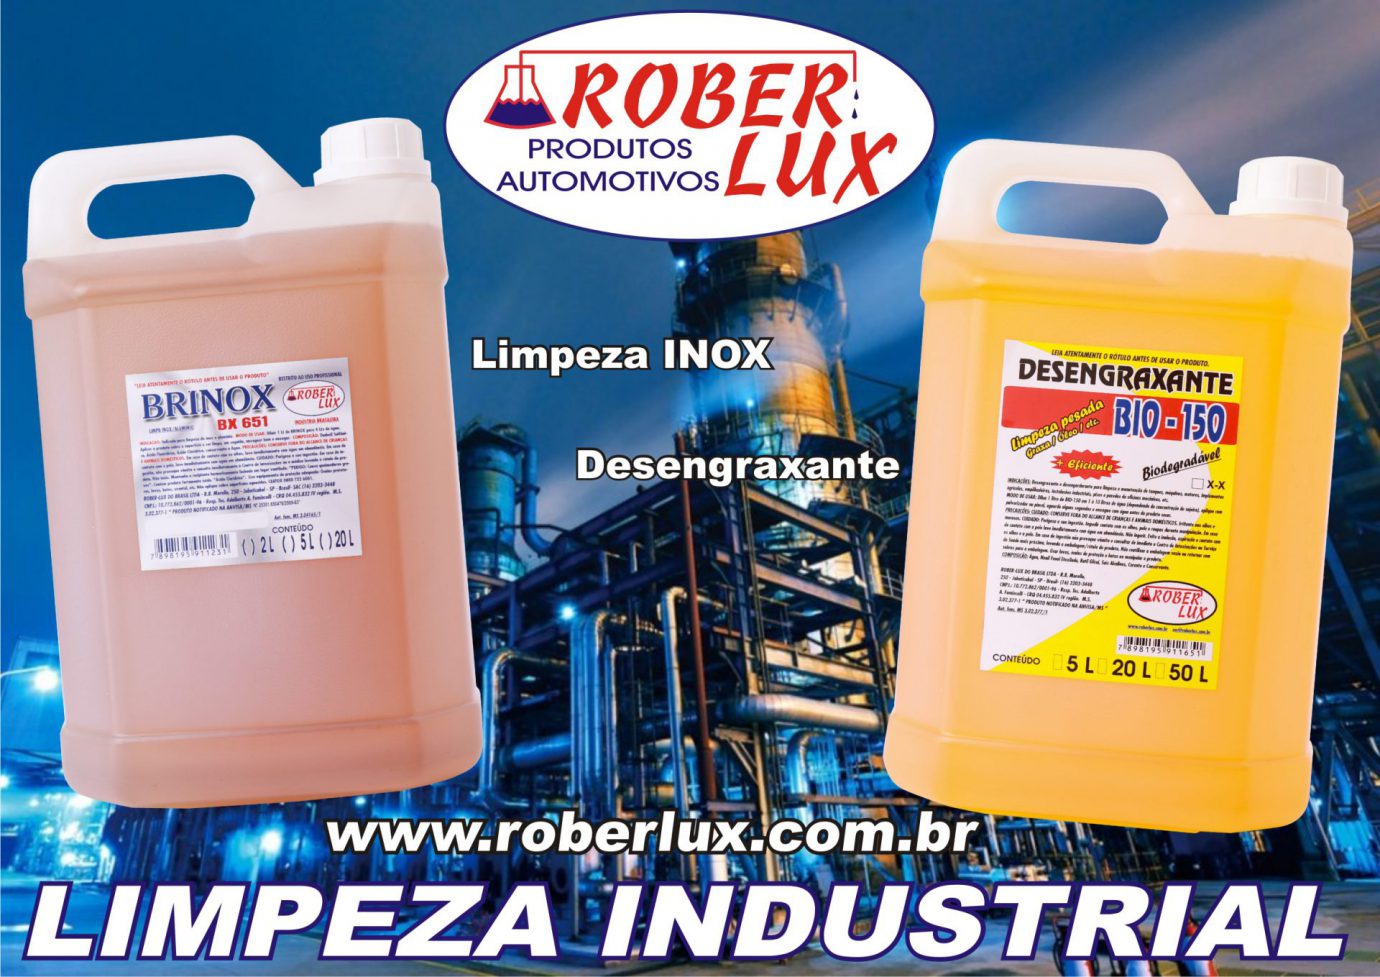 Limpeza industrial